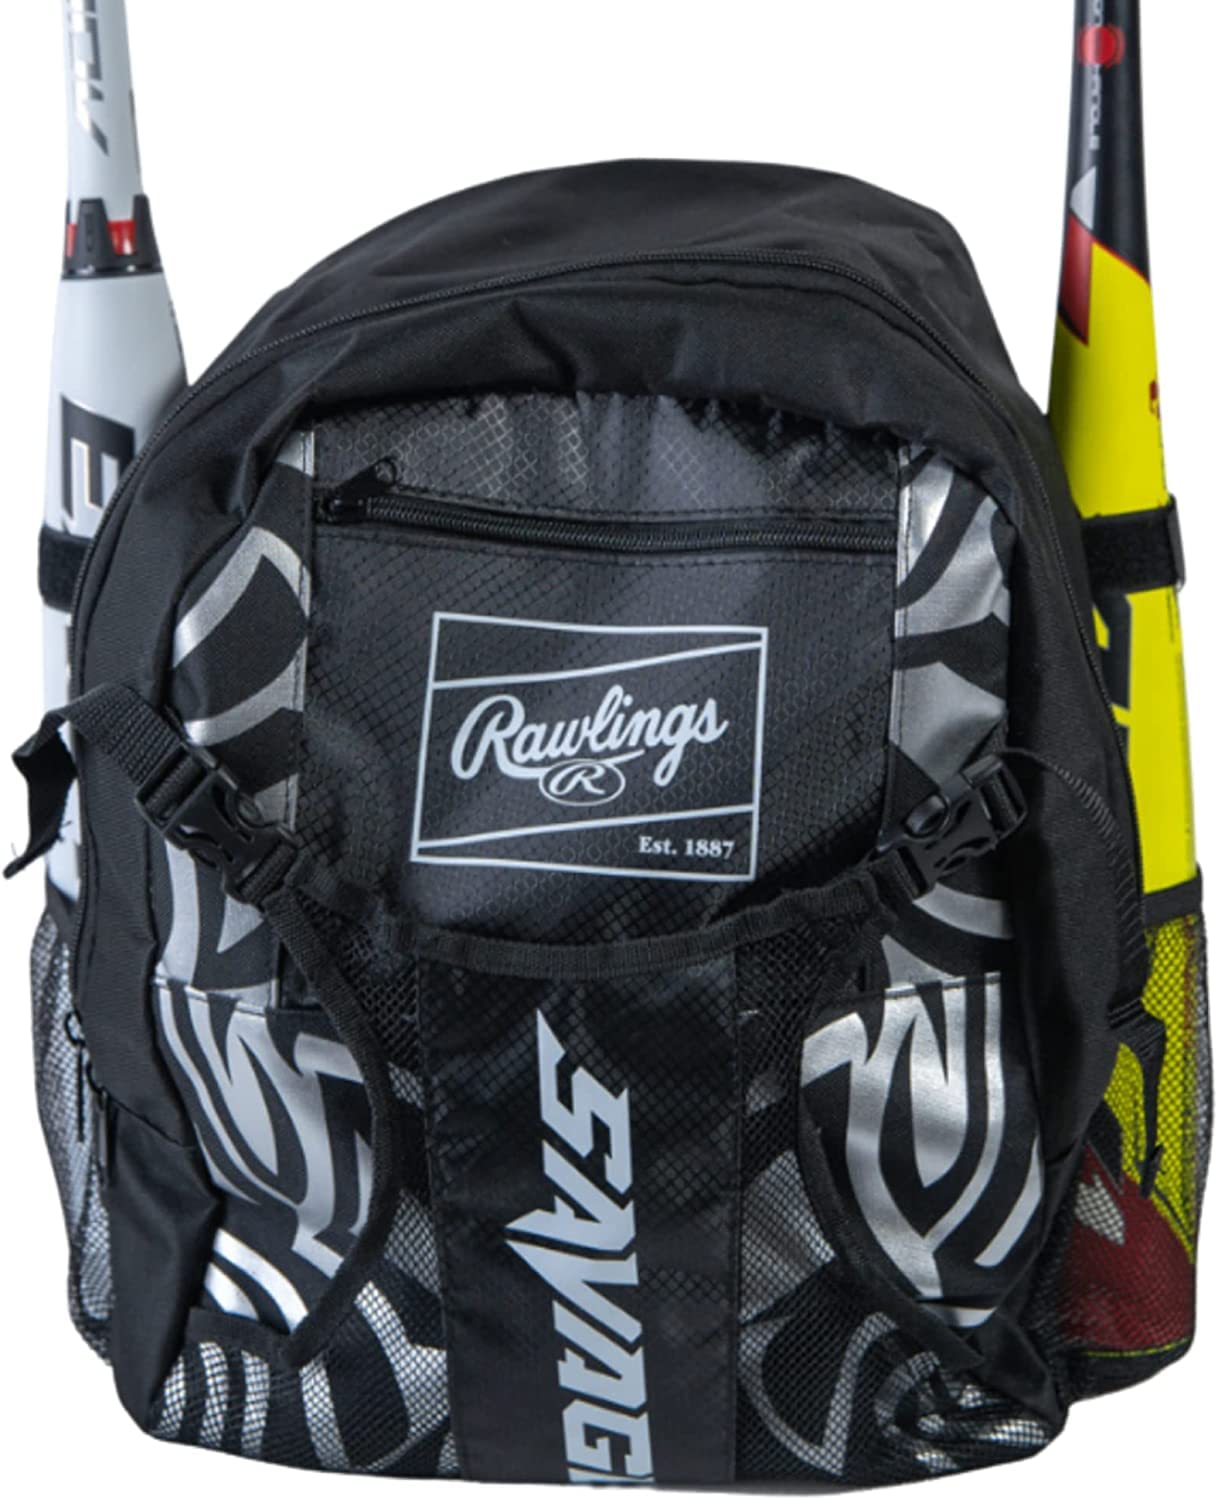 Rawlings Youth Baseball & Softball Savage Equipment Backpack (Black/Silver) $14.95 + Free Shipping w/ Prime or on $35+